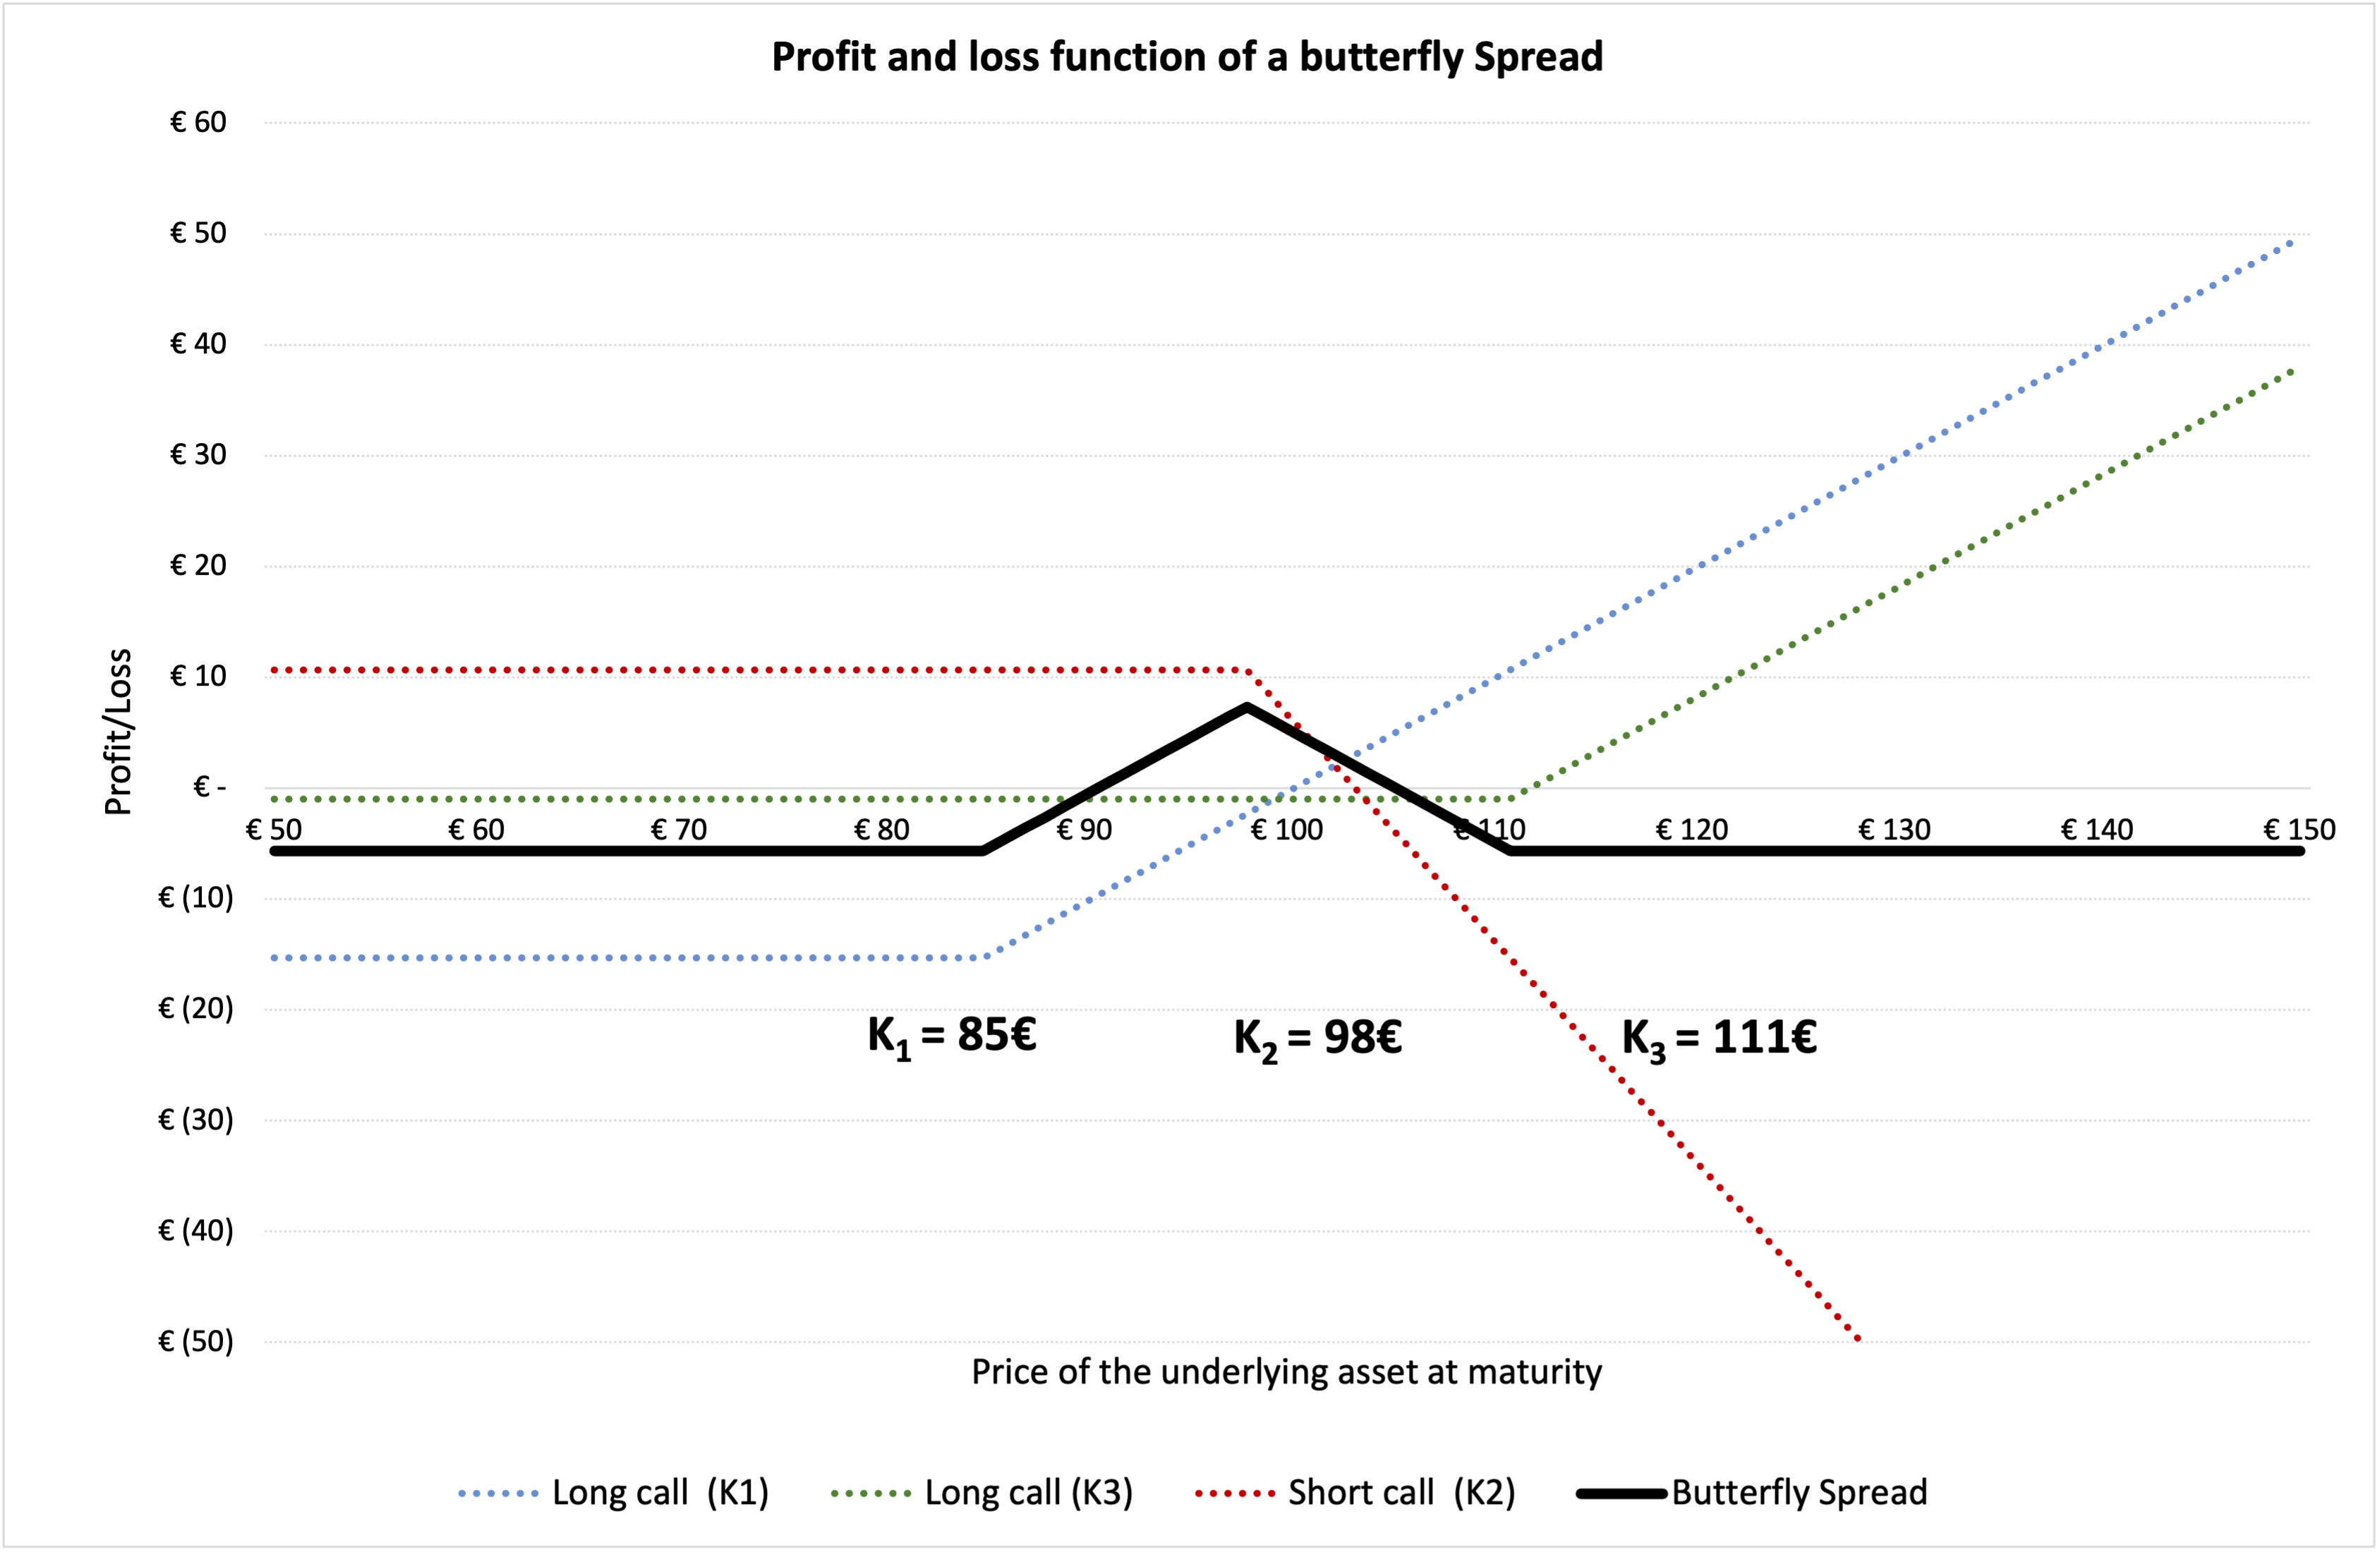  Profit and loss (P&L) function of a butterfly spread 